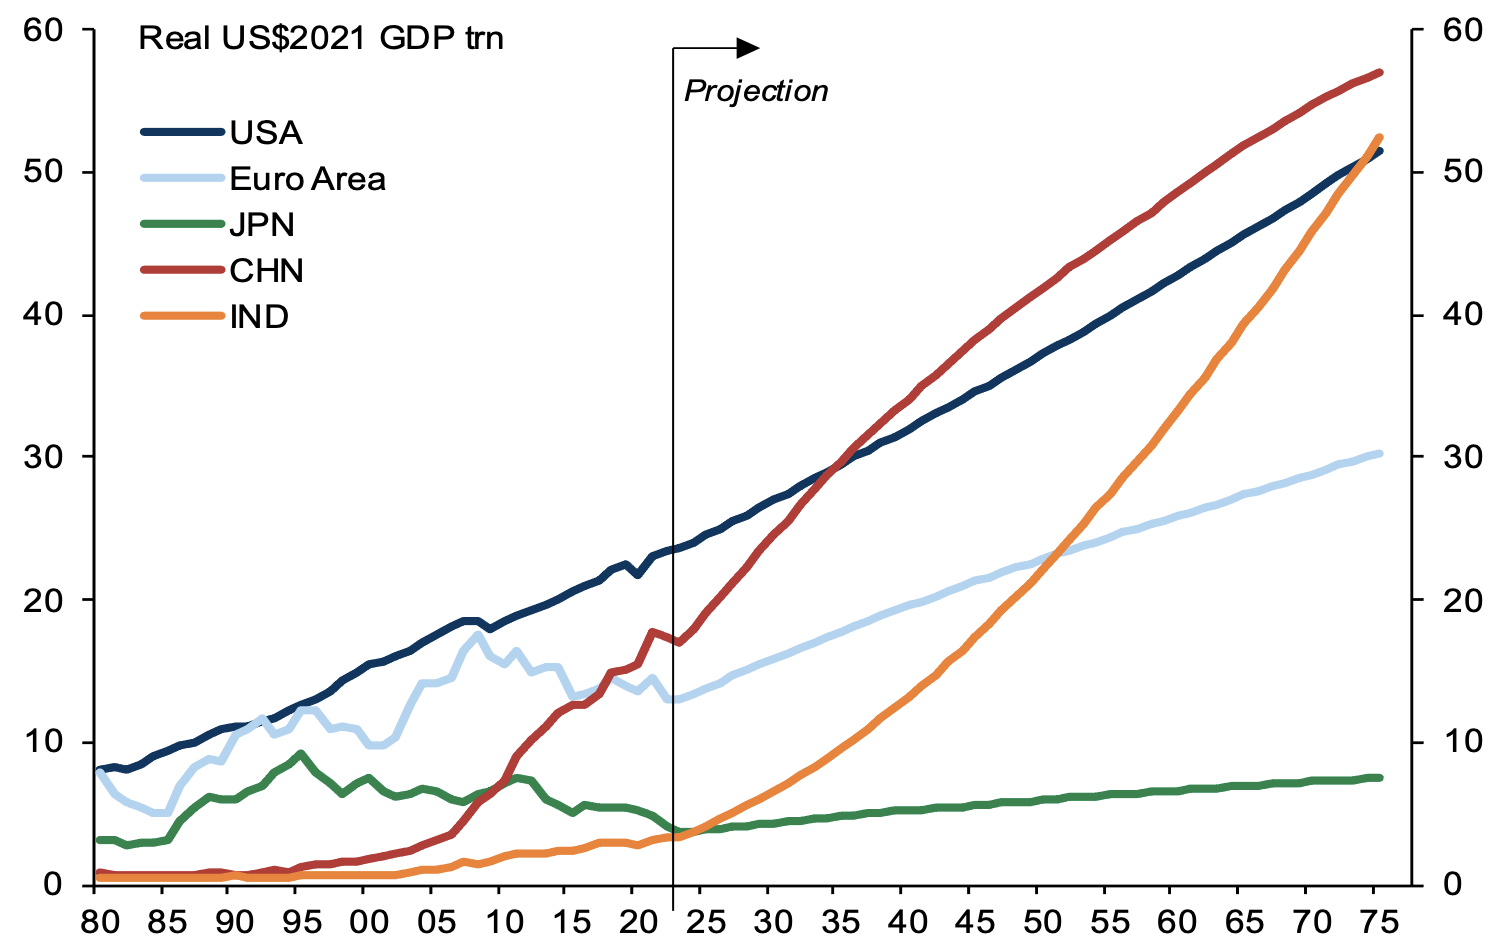 Figure 4a China to overtake US in around 2035, while India should catch up by 2075